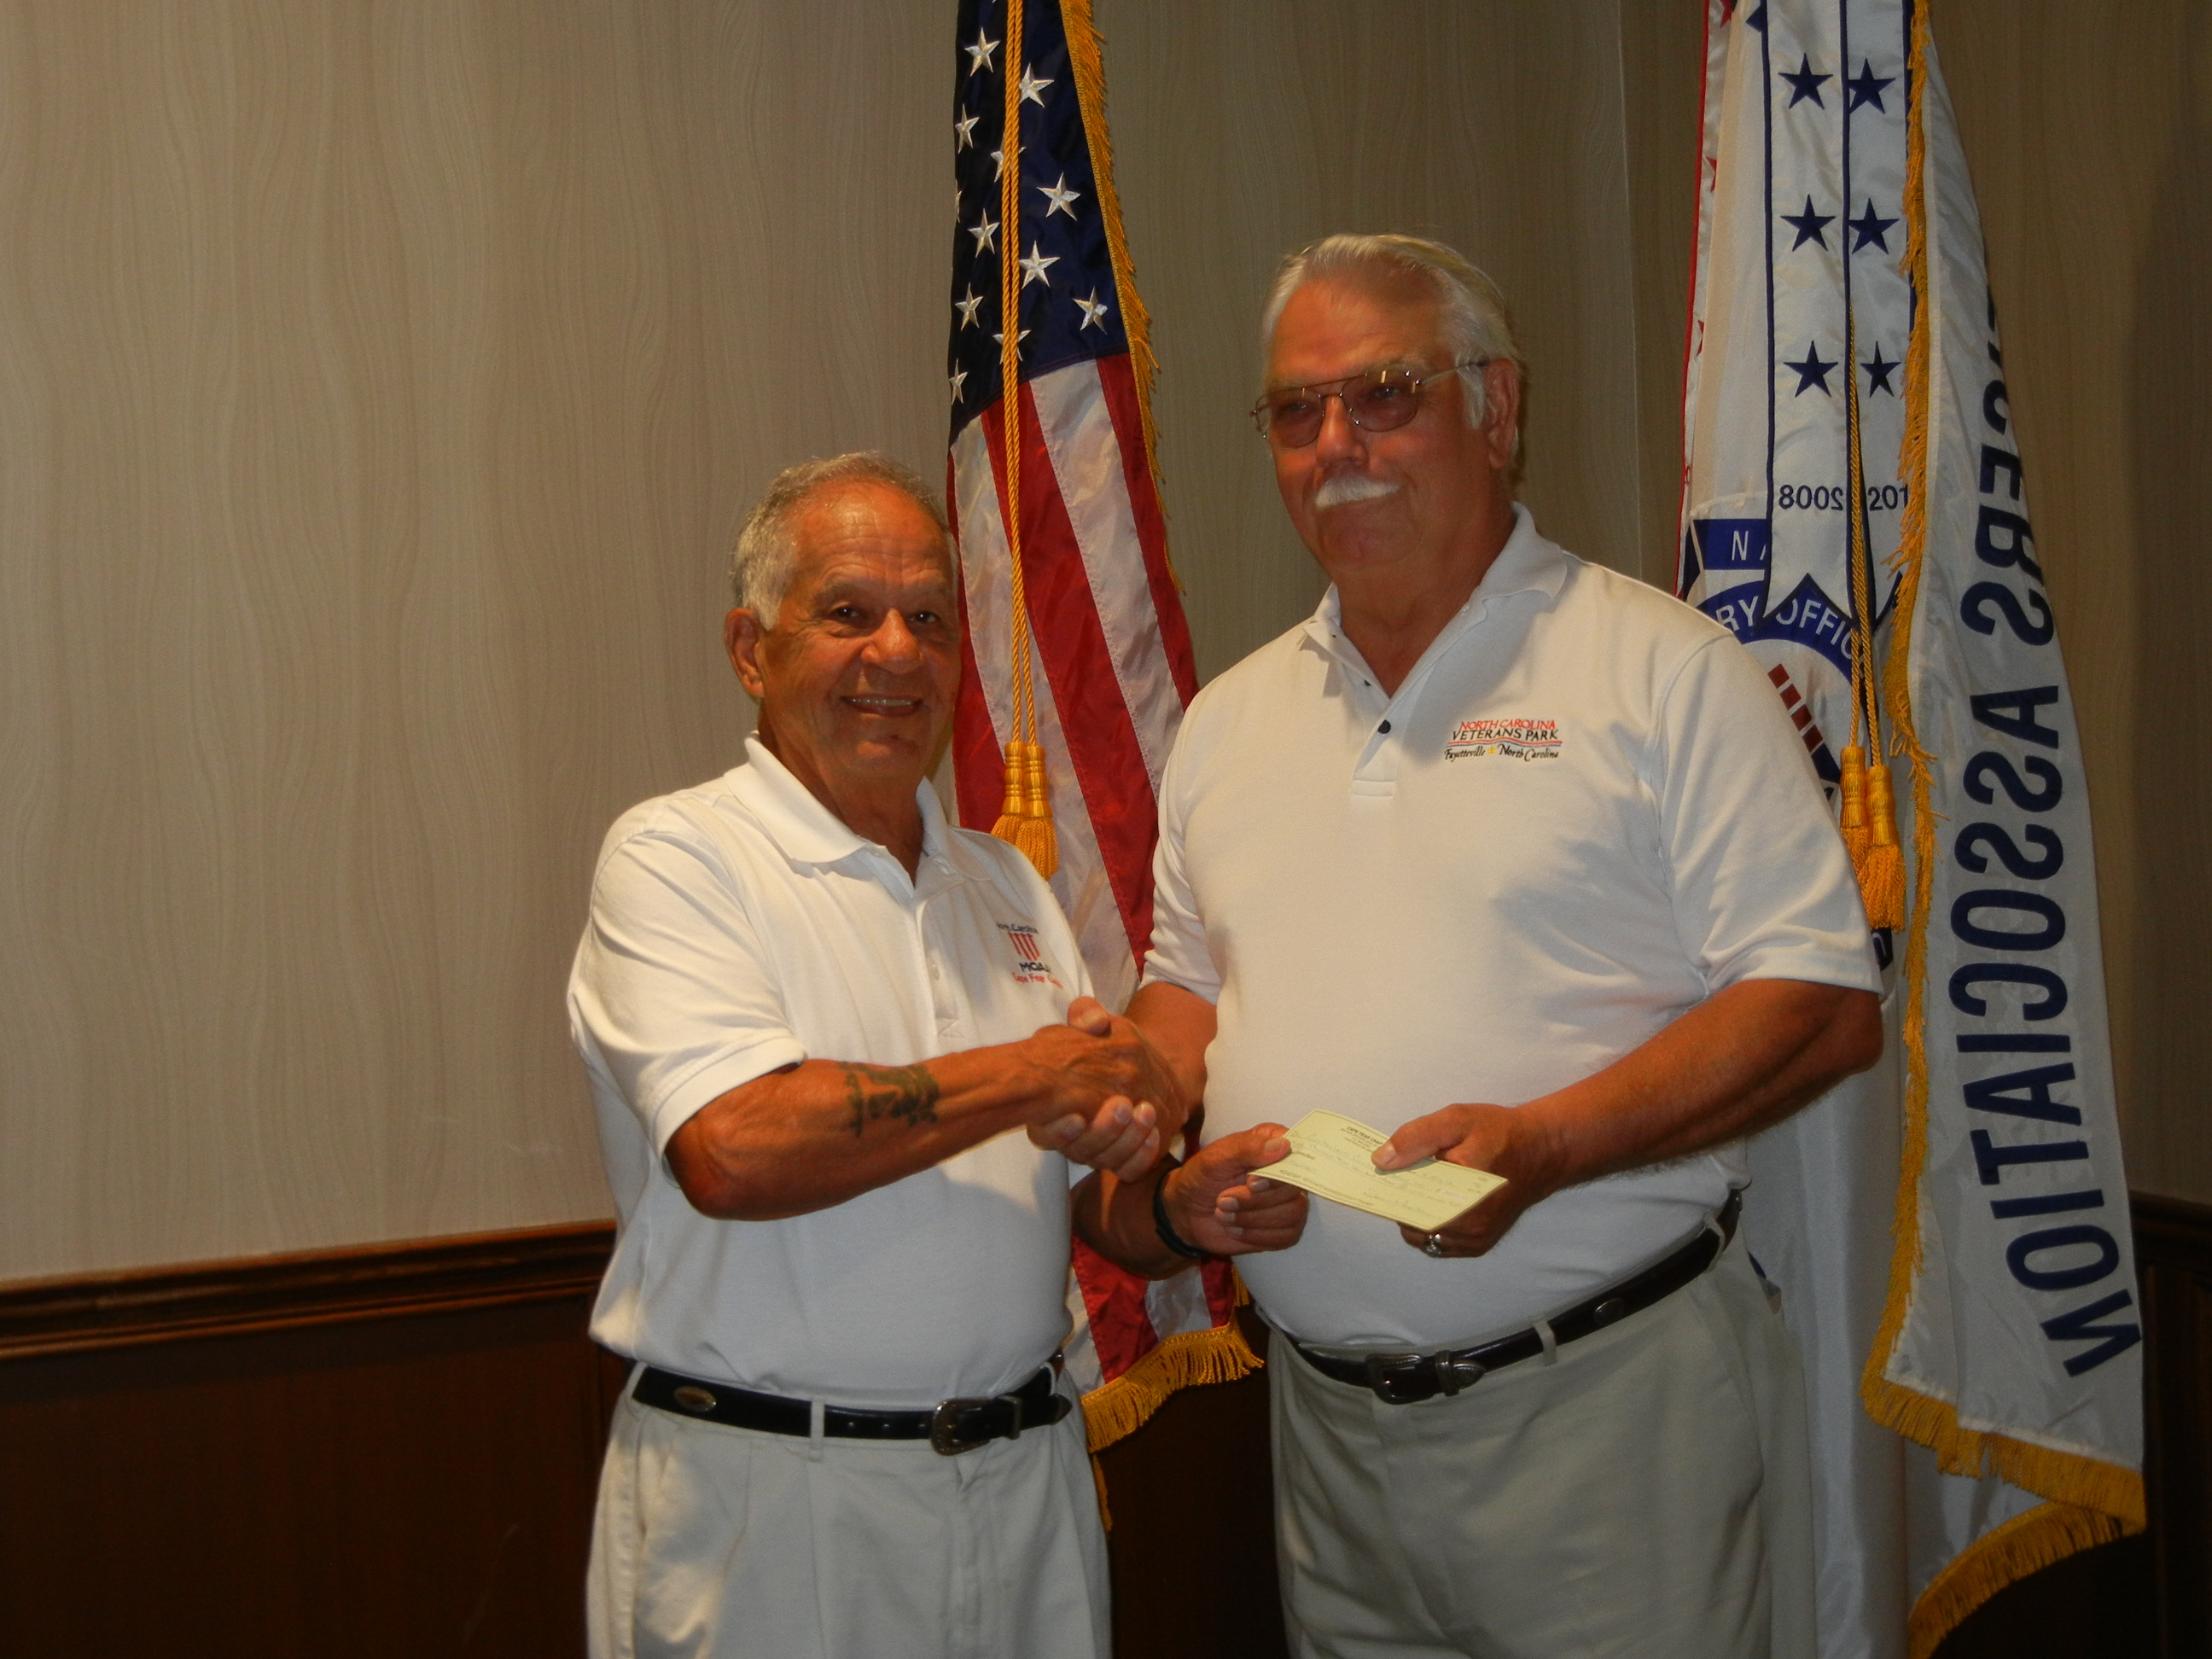 At the Memorial Day Ceremony Juan Chavez, president of the Cape Fear Chapter, MOAA, presented Don Talbot, chairman of the Freedom Memorial Park steeting committee and the GWOT fund raising committee, with a check for $19,300.00 with a promise to meet a goal of $25,000.00.